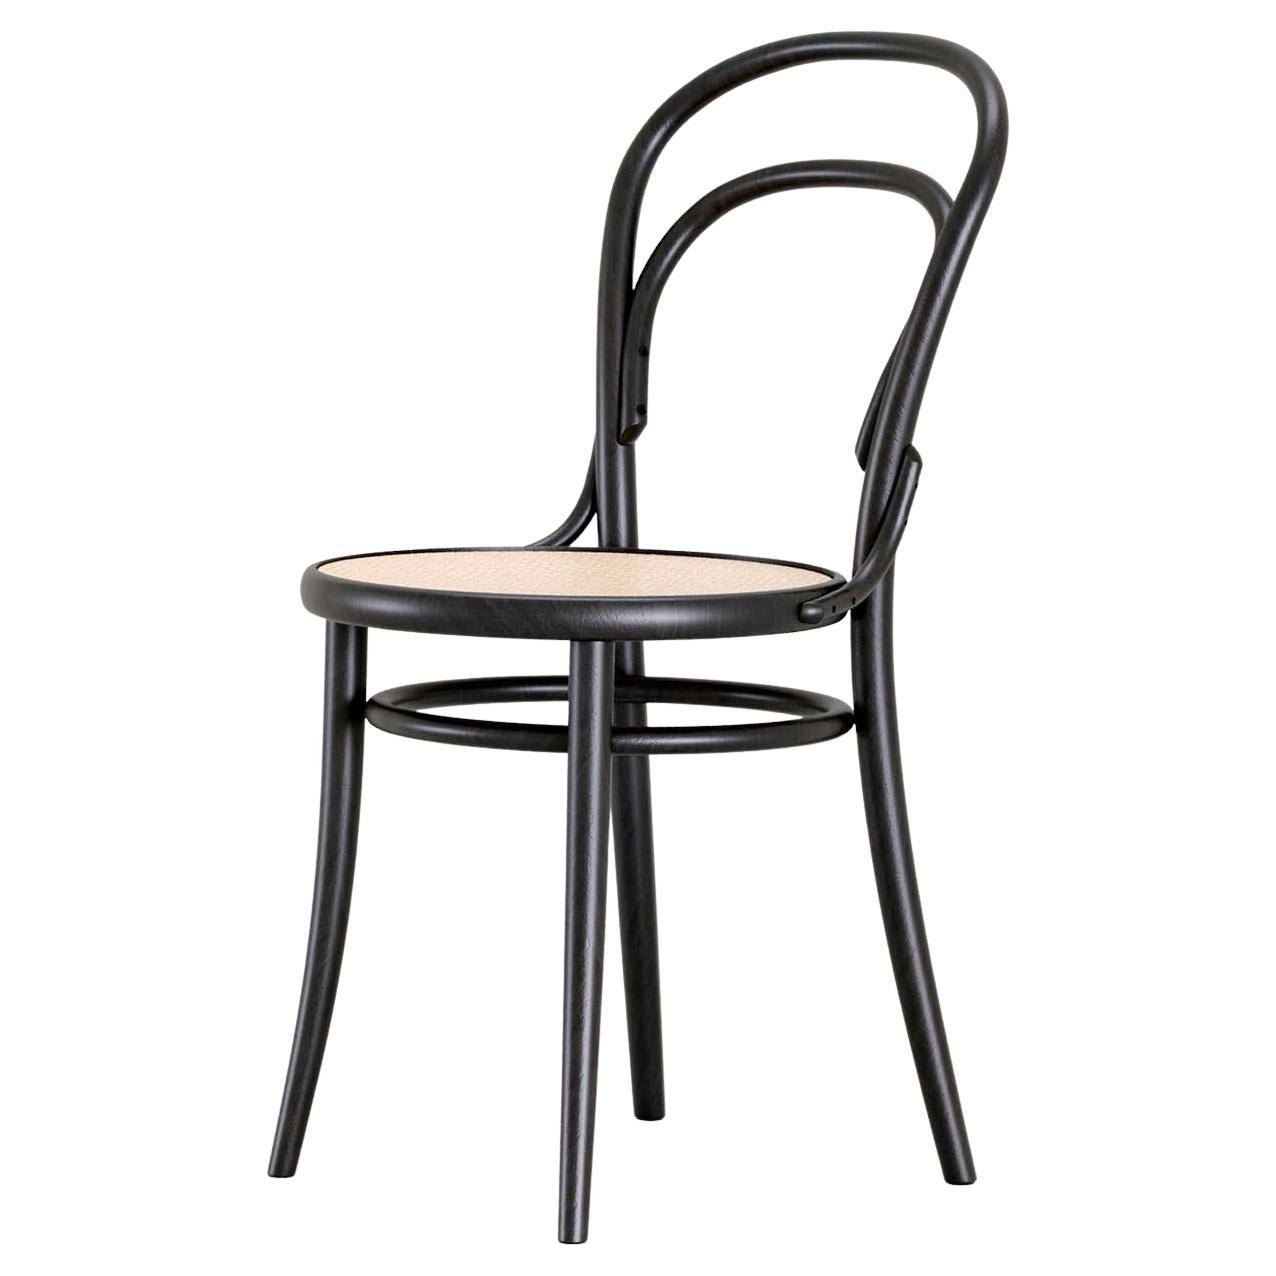 Contemporary Bistro Chair No. 14 by Ton, Black Beech and Cane Seat For Sale